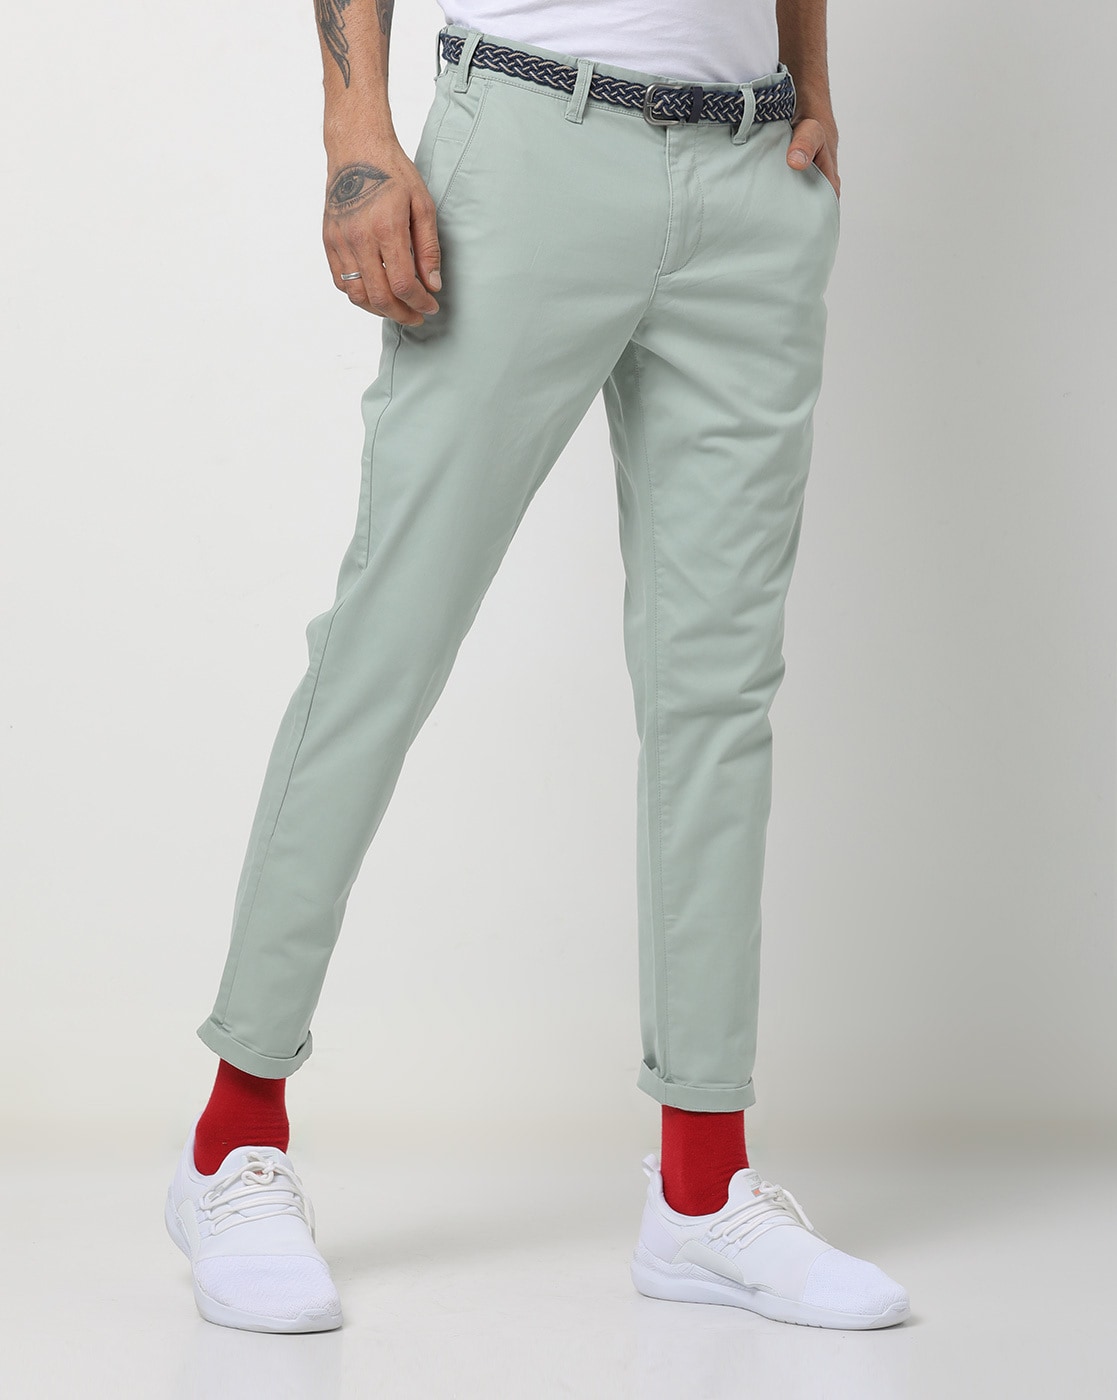 10 Trending Collection of Red Trousers for Men and Women